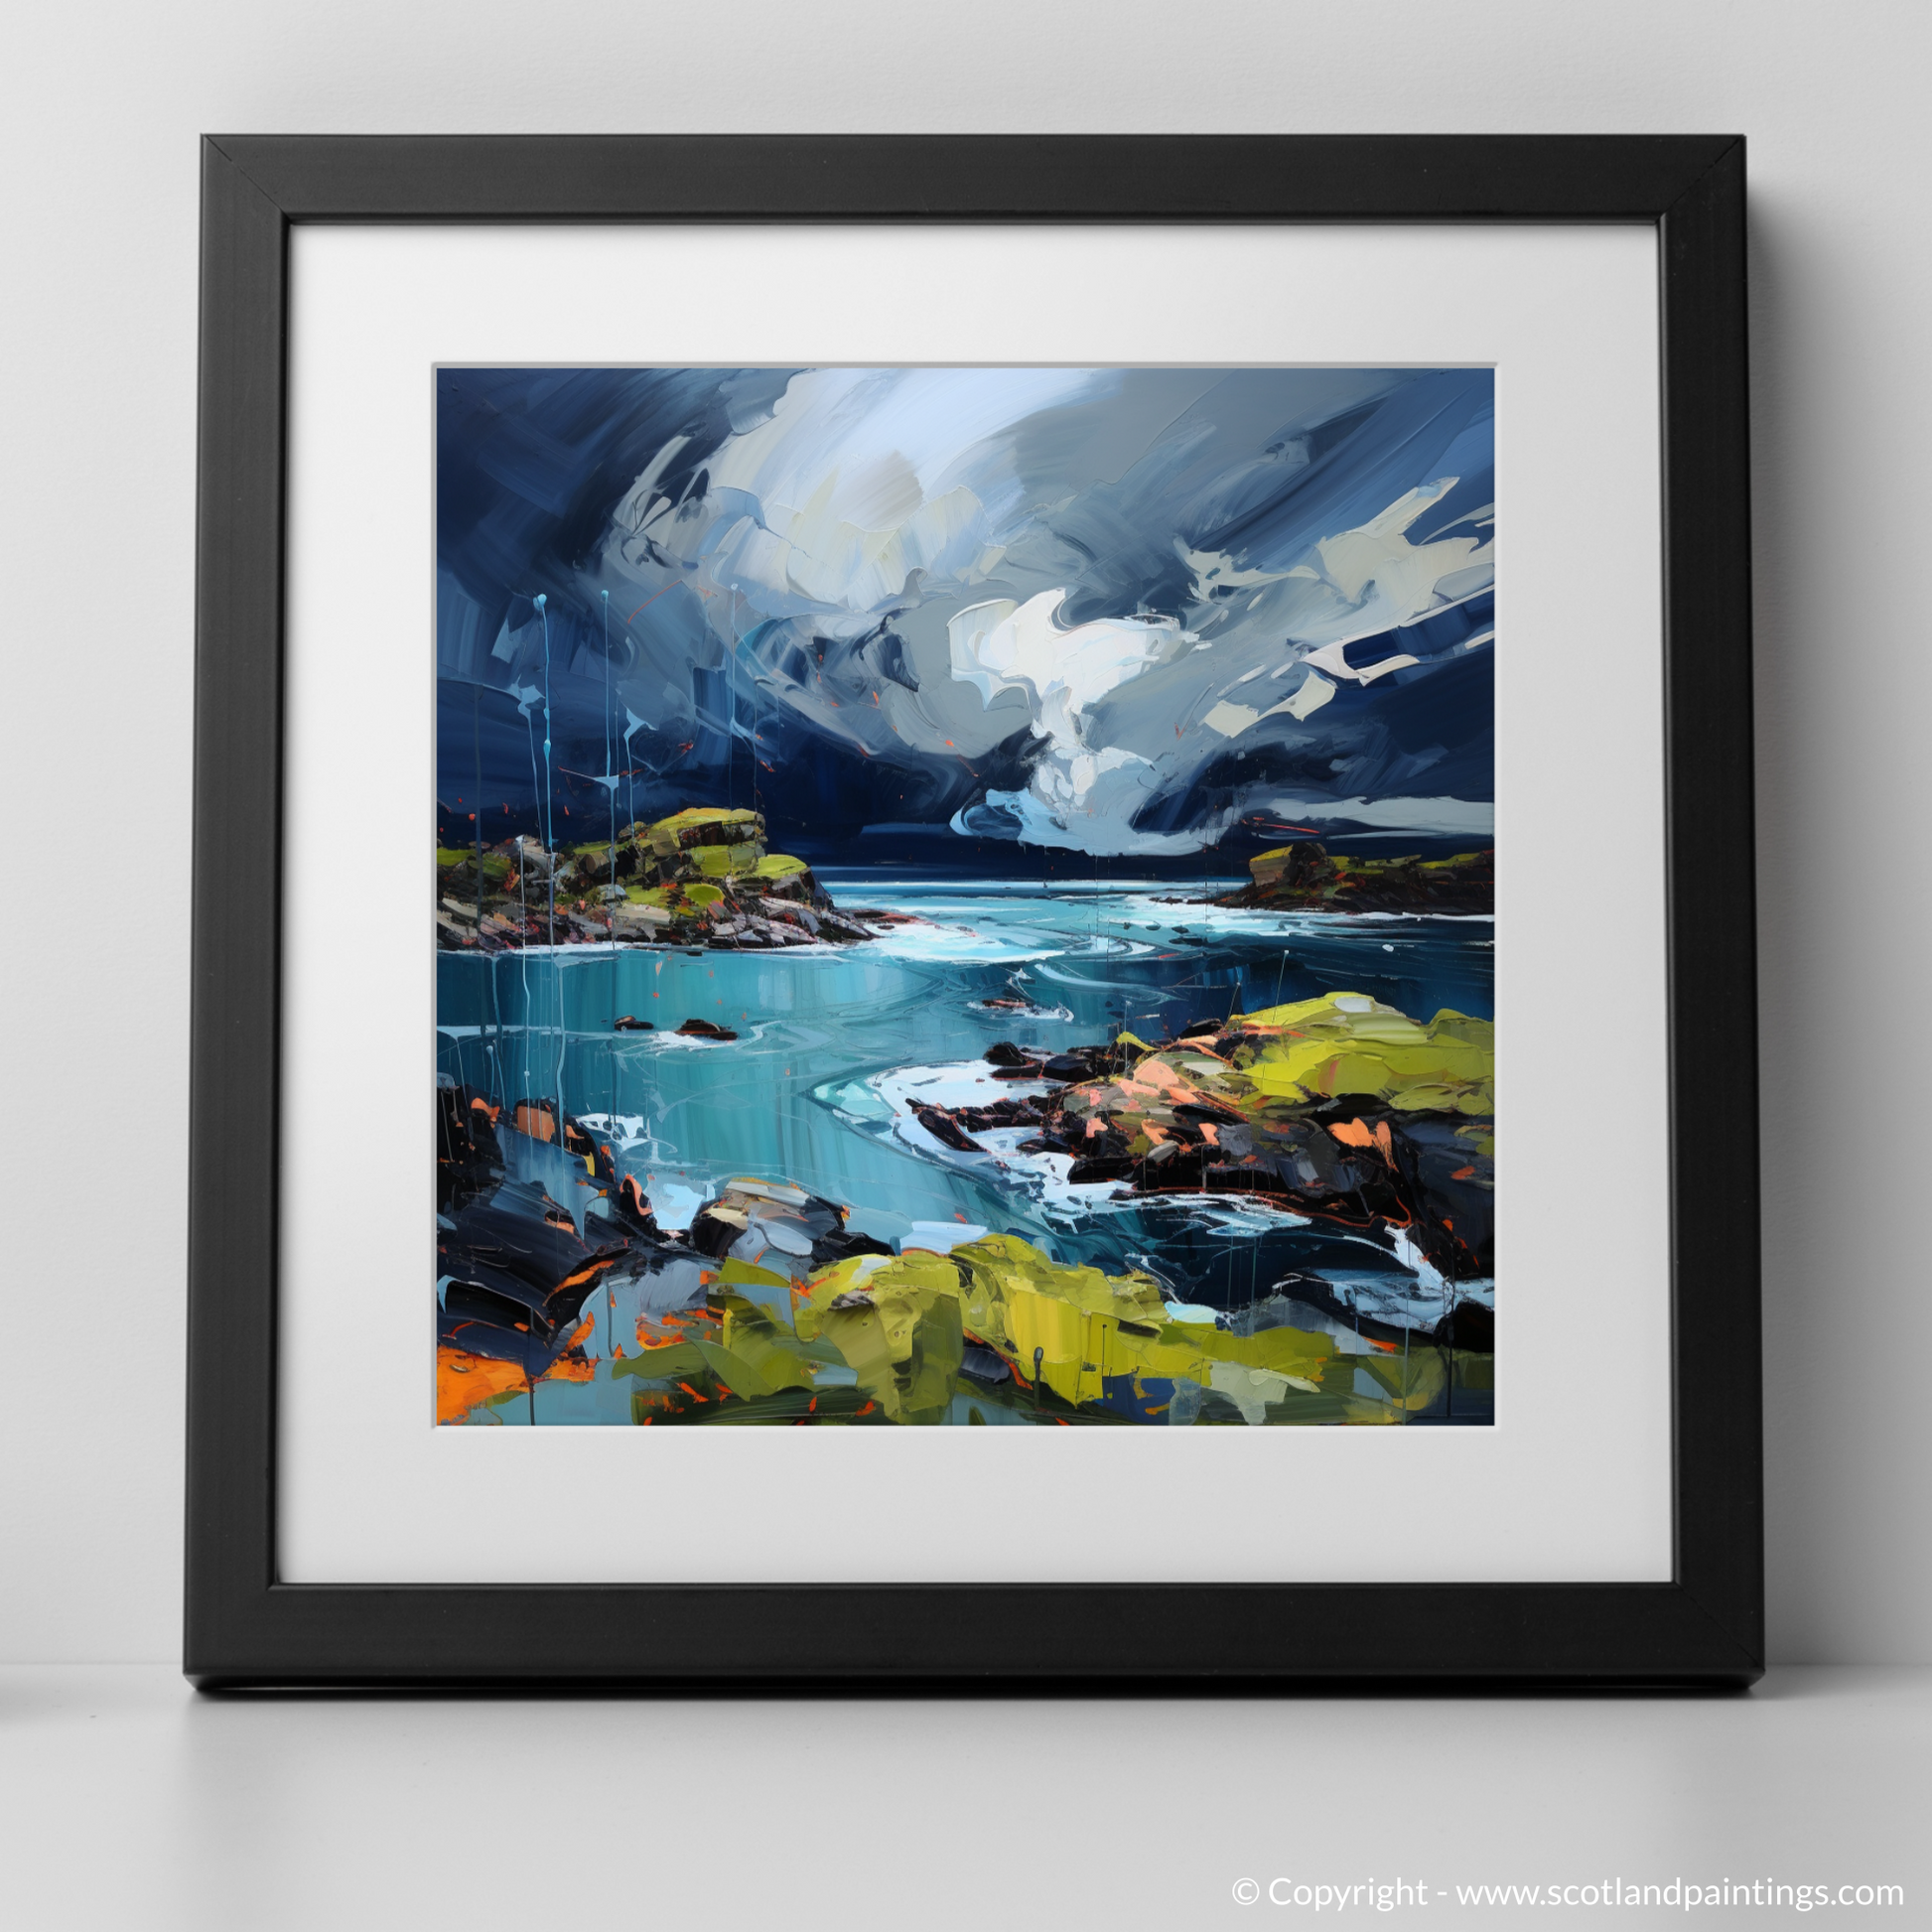 Art Print of Ardalanish Bay with a stormy sky with a black frame